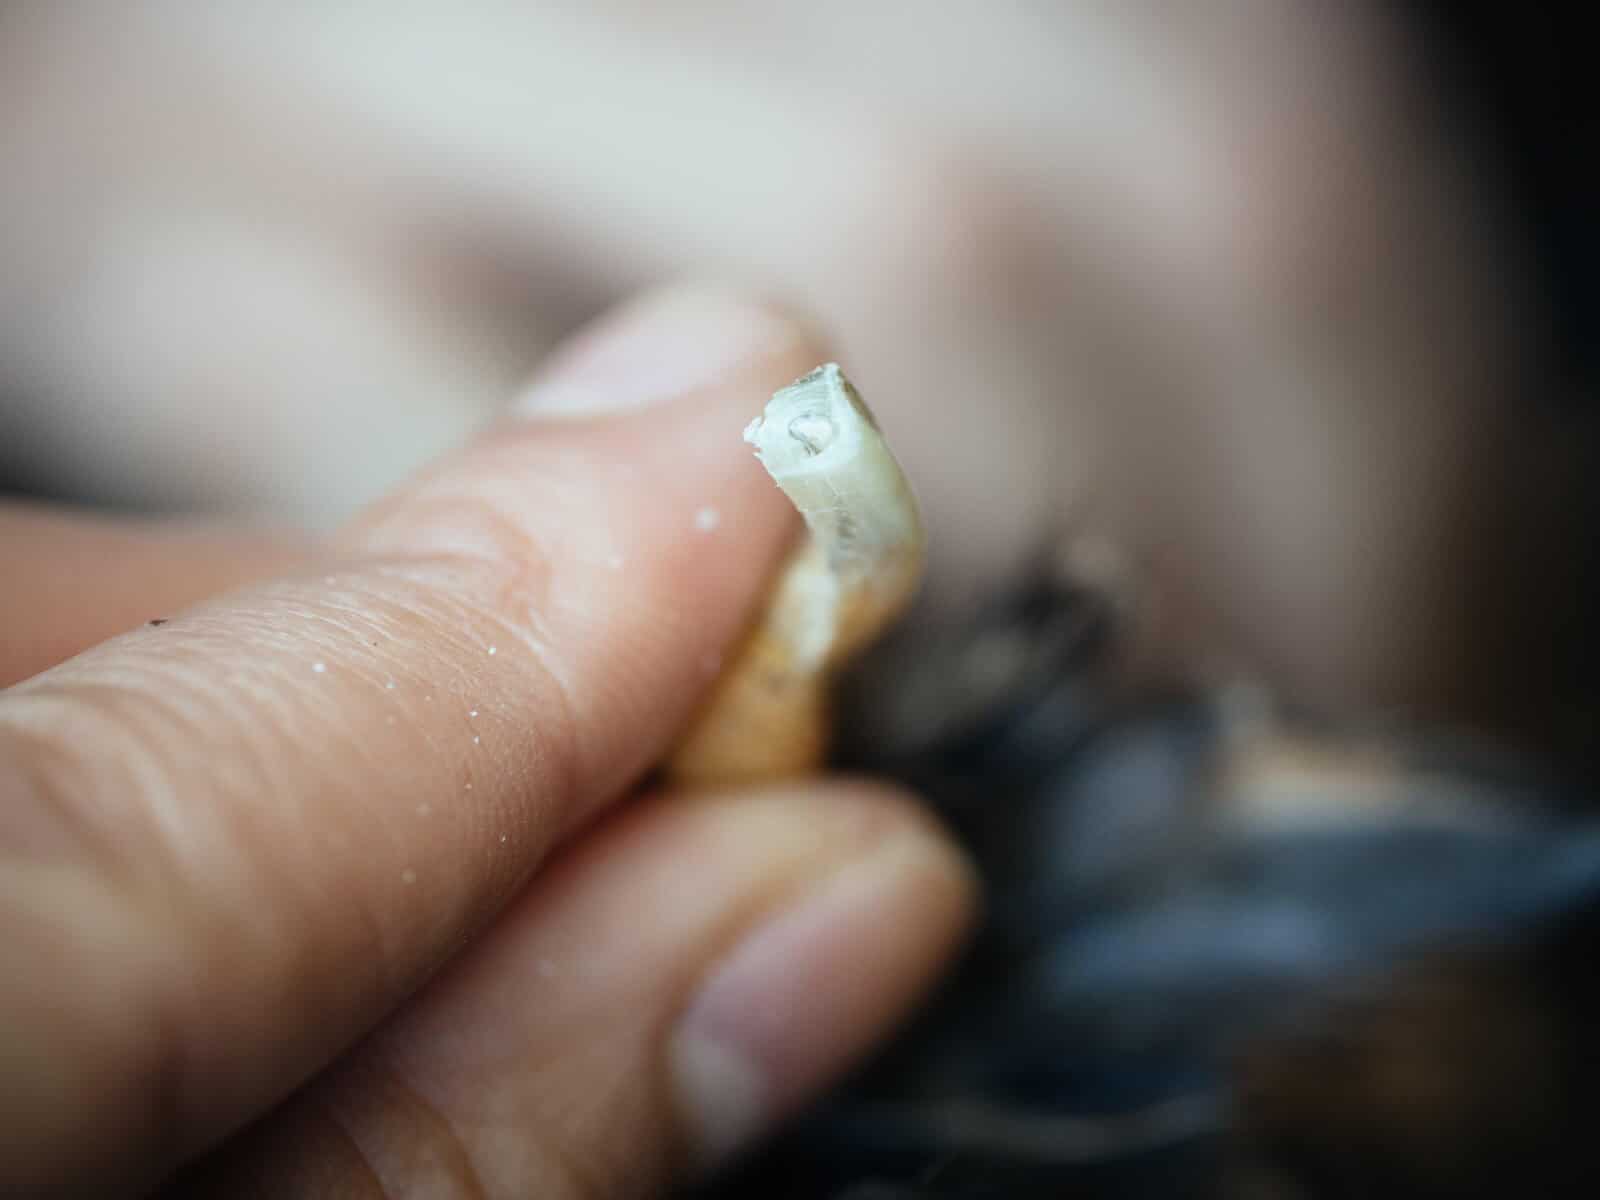 A neatly trimmed chicken nail